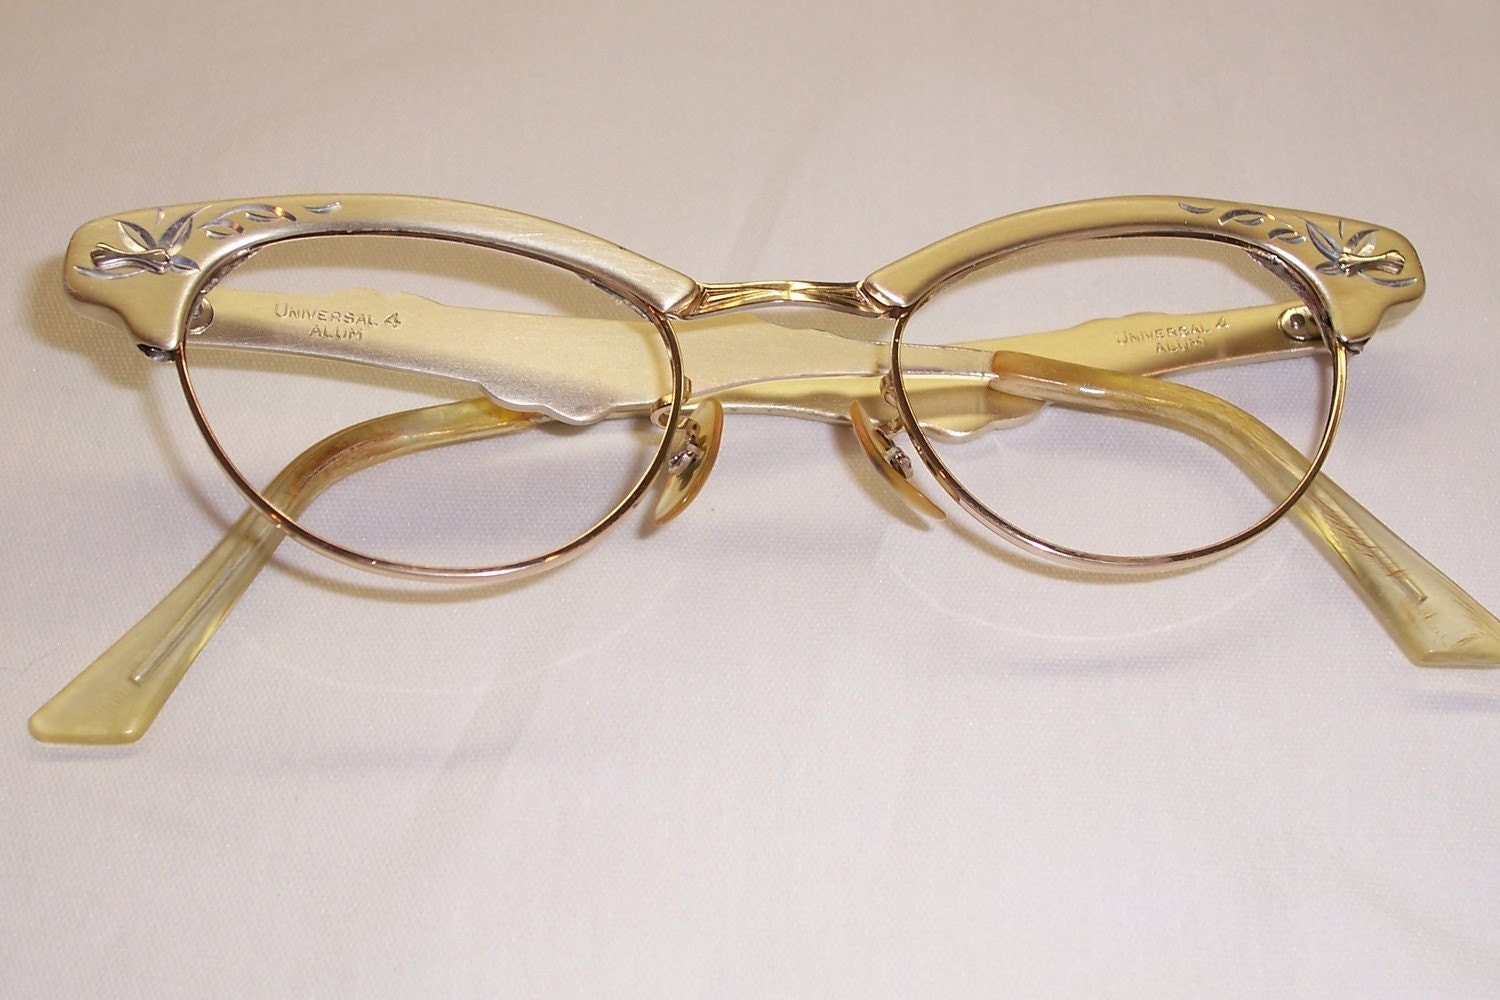 Vintage Cateye Frame from Universal